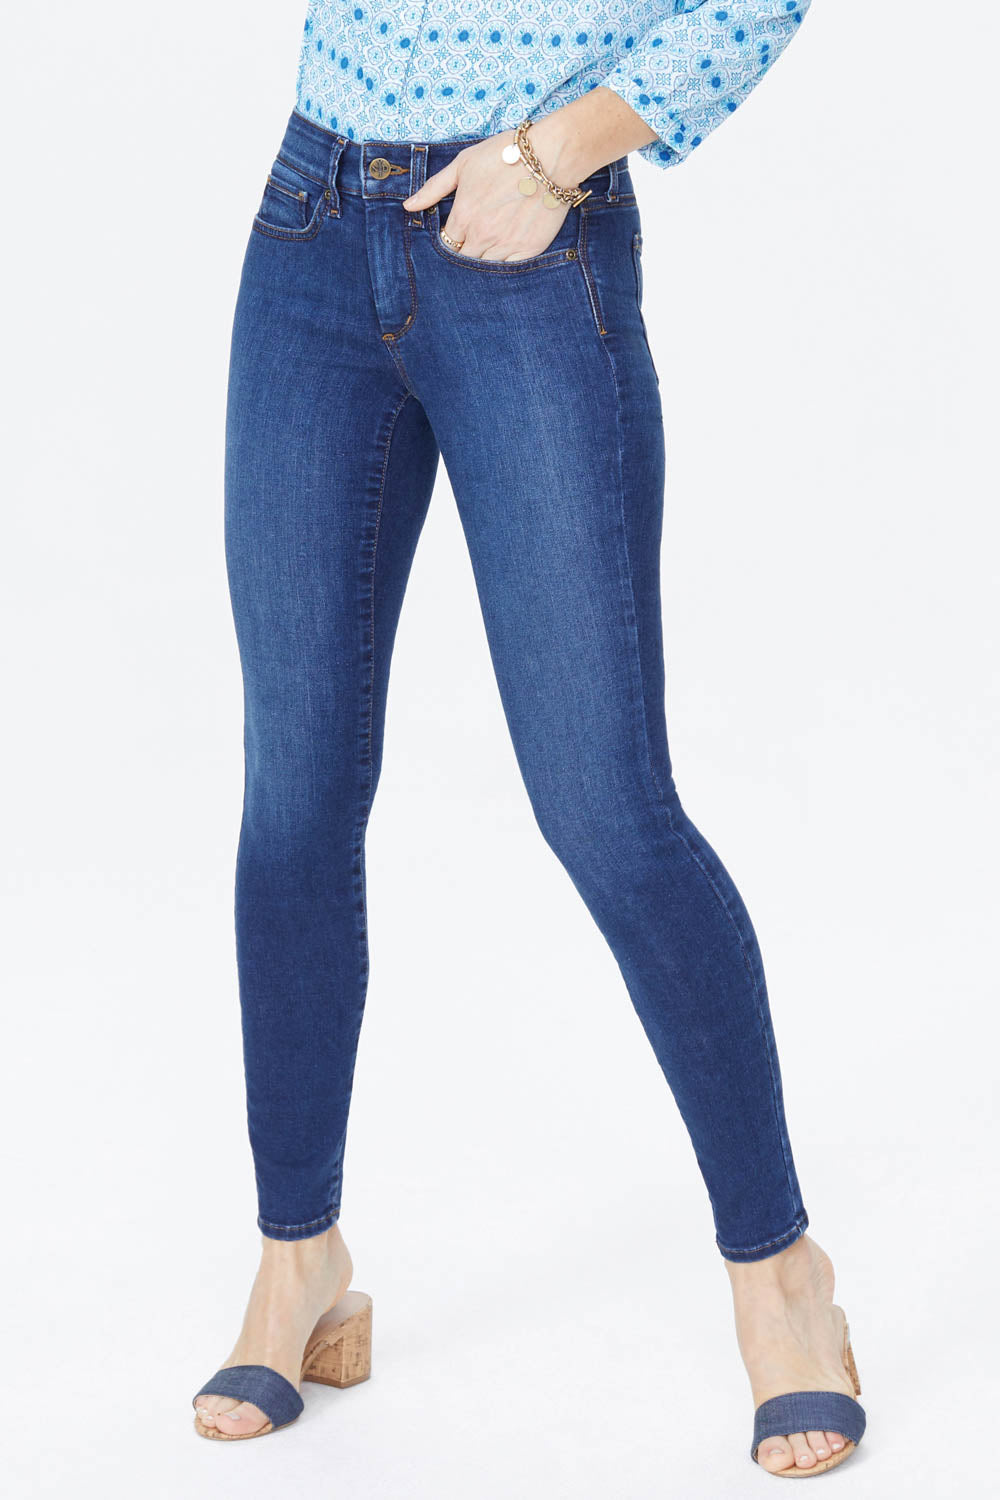 Ami Skinny Jeans In Tall With 36 Inseam - Cooper Blue